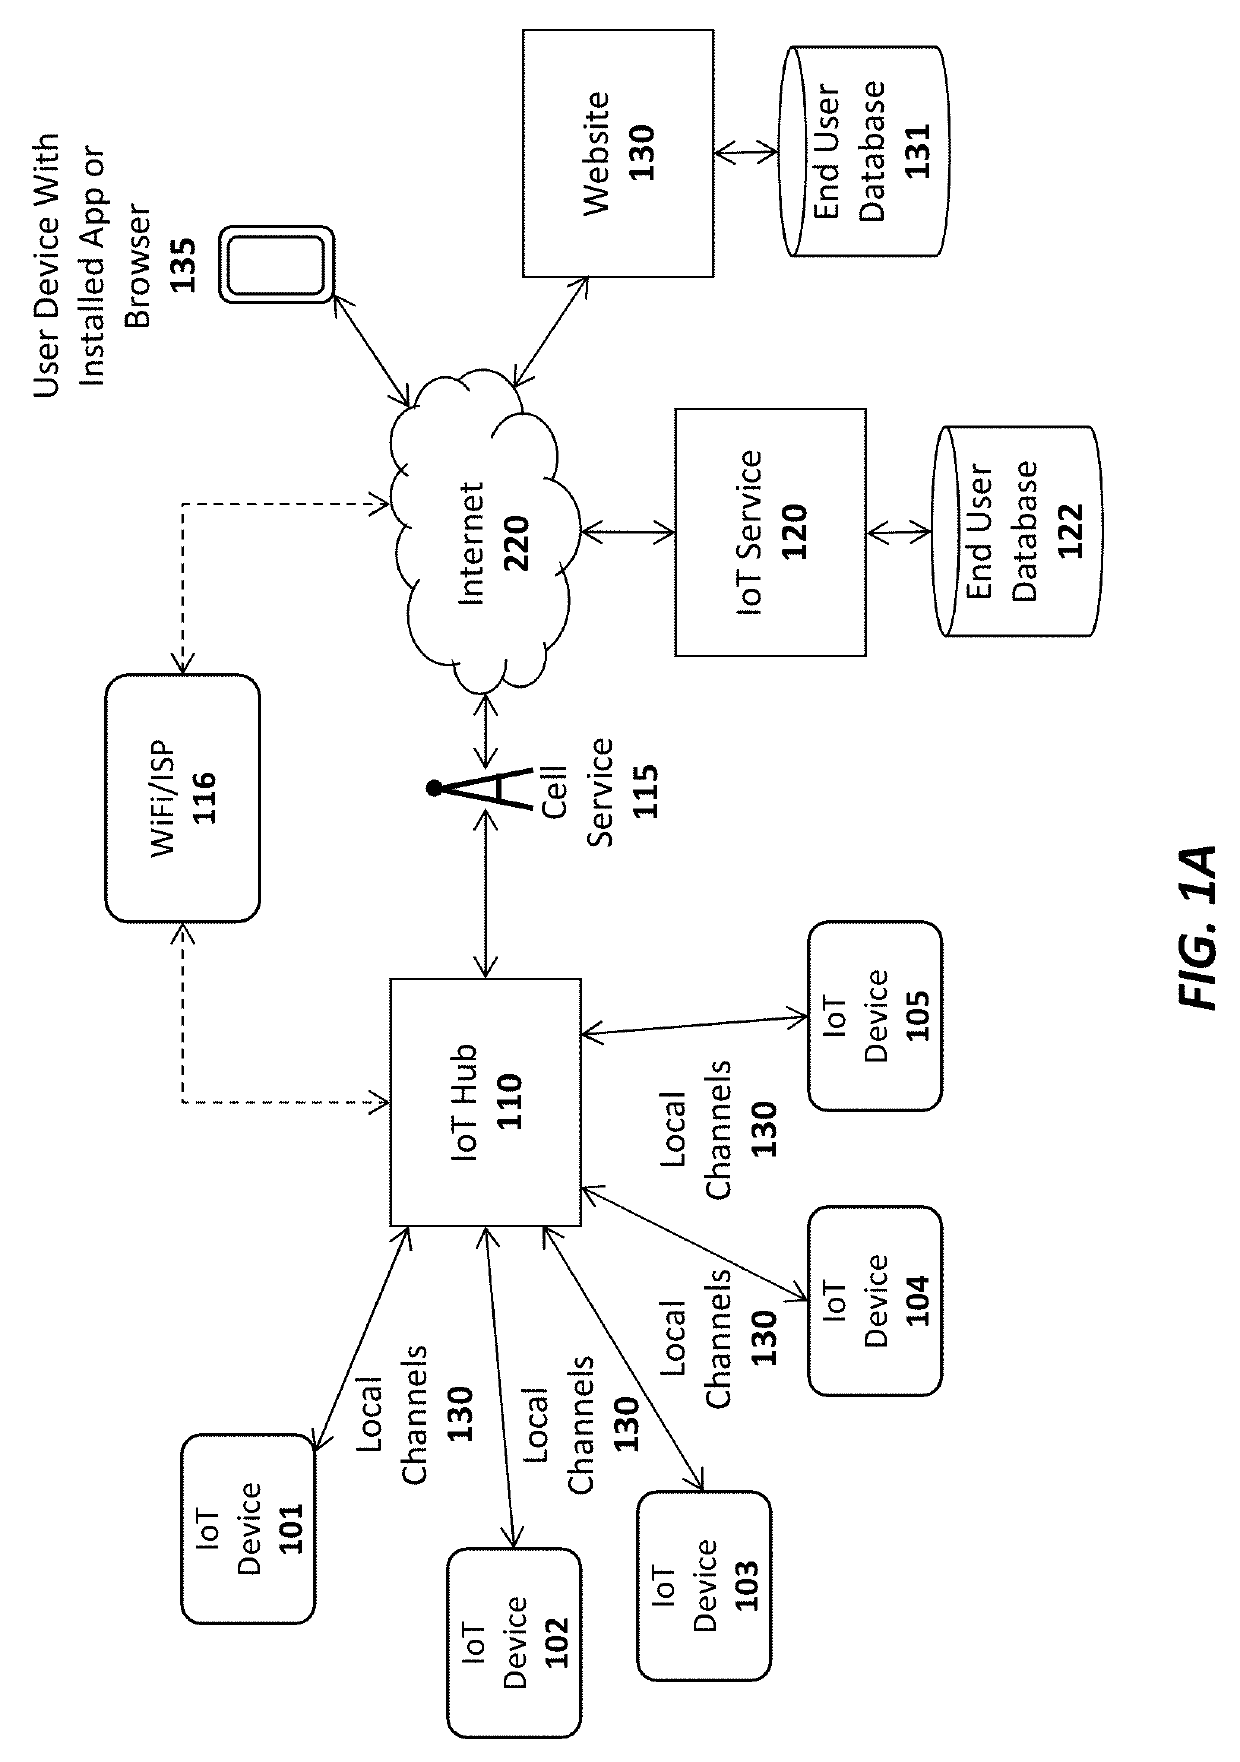 Apparatus and method for internet of things (IOT) security lock and notification device